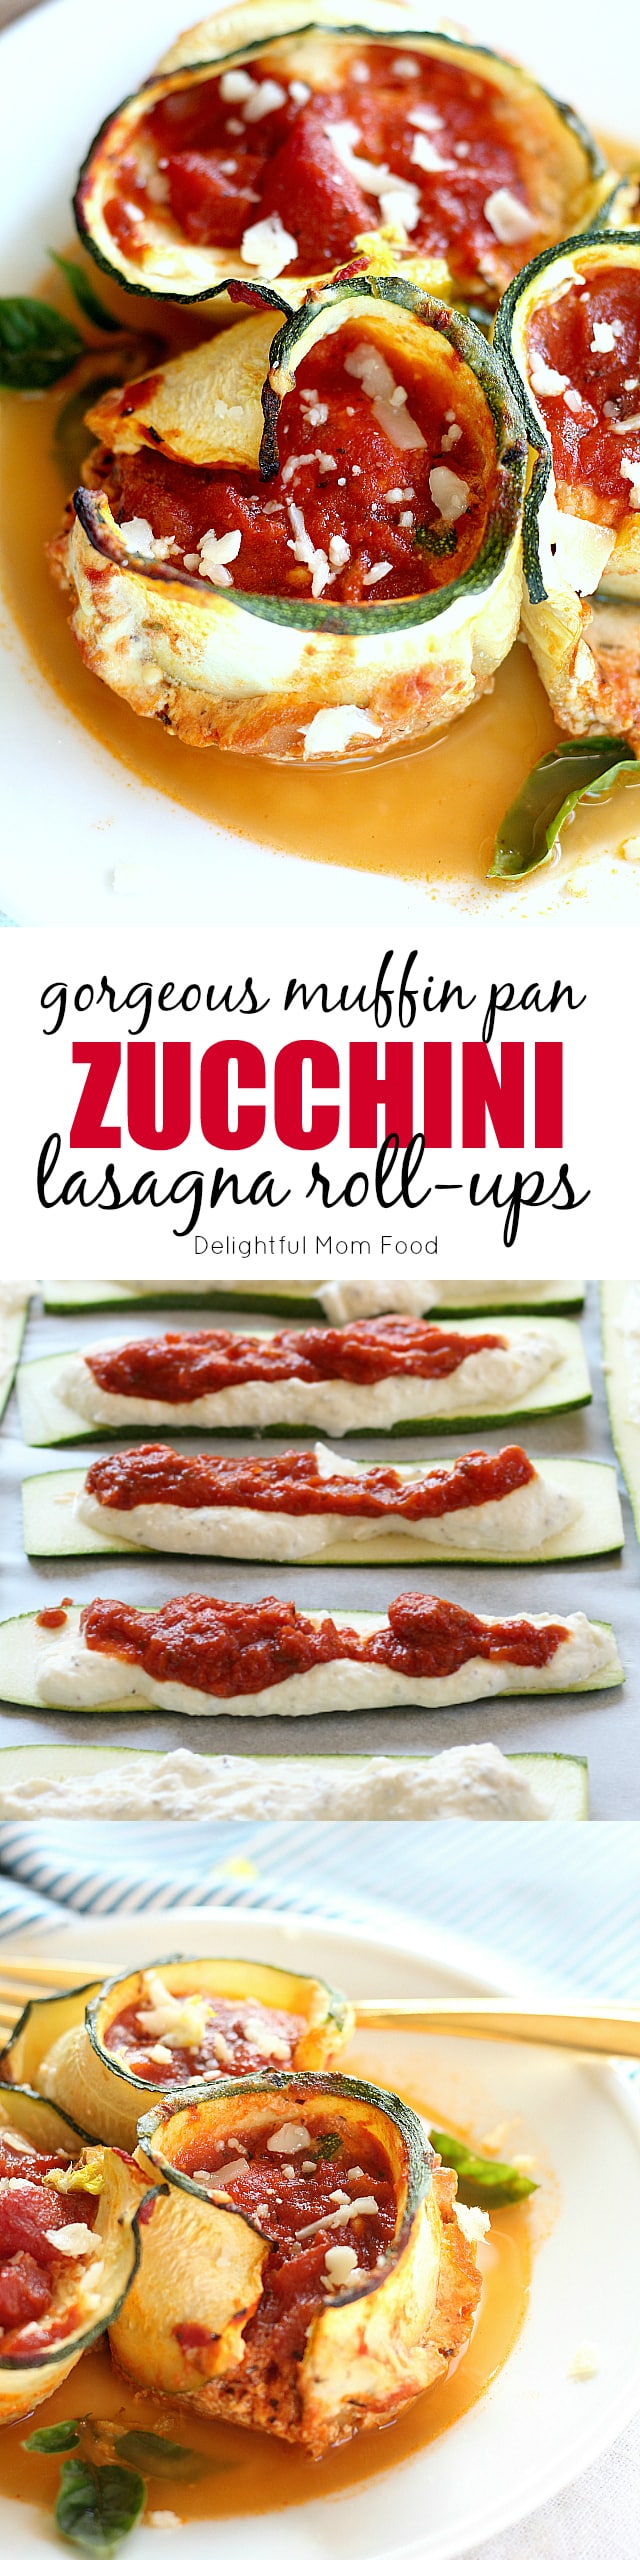 Vegetarian zucchini lasagna rolls sliced into flat-shaped pasta shapes, layered with sauce, rolled and baked in a muffin pan! Easiest Italian "lasagne" dinner that is ready in less than 45 minutes and can be made ahead of time! 